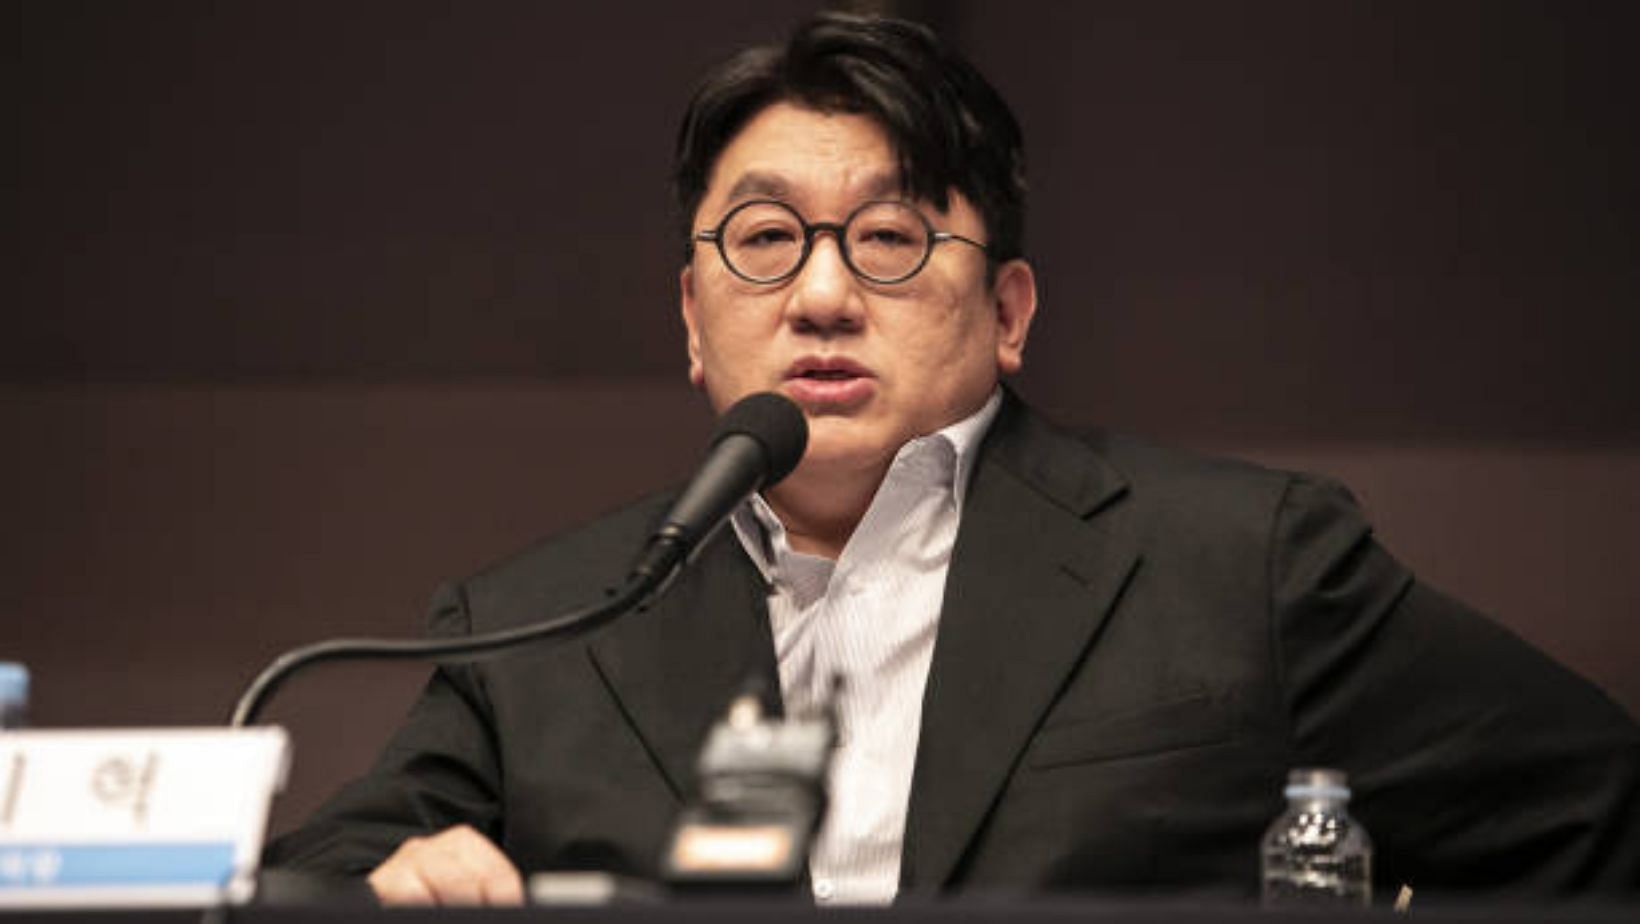 Bang Si-hyuk&rsquo;s net worth and HYBE to pay Min Hee-jin $14.5M in compensation. (Image via GETTY/Photographer: Jean Chung/Bloomberg via Getty Images)